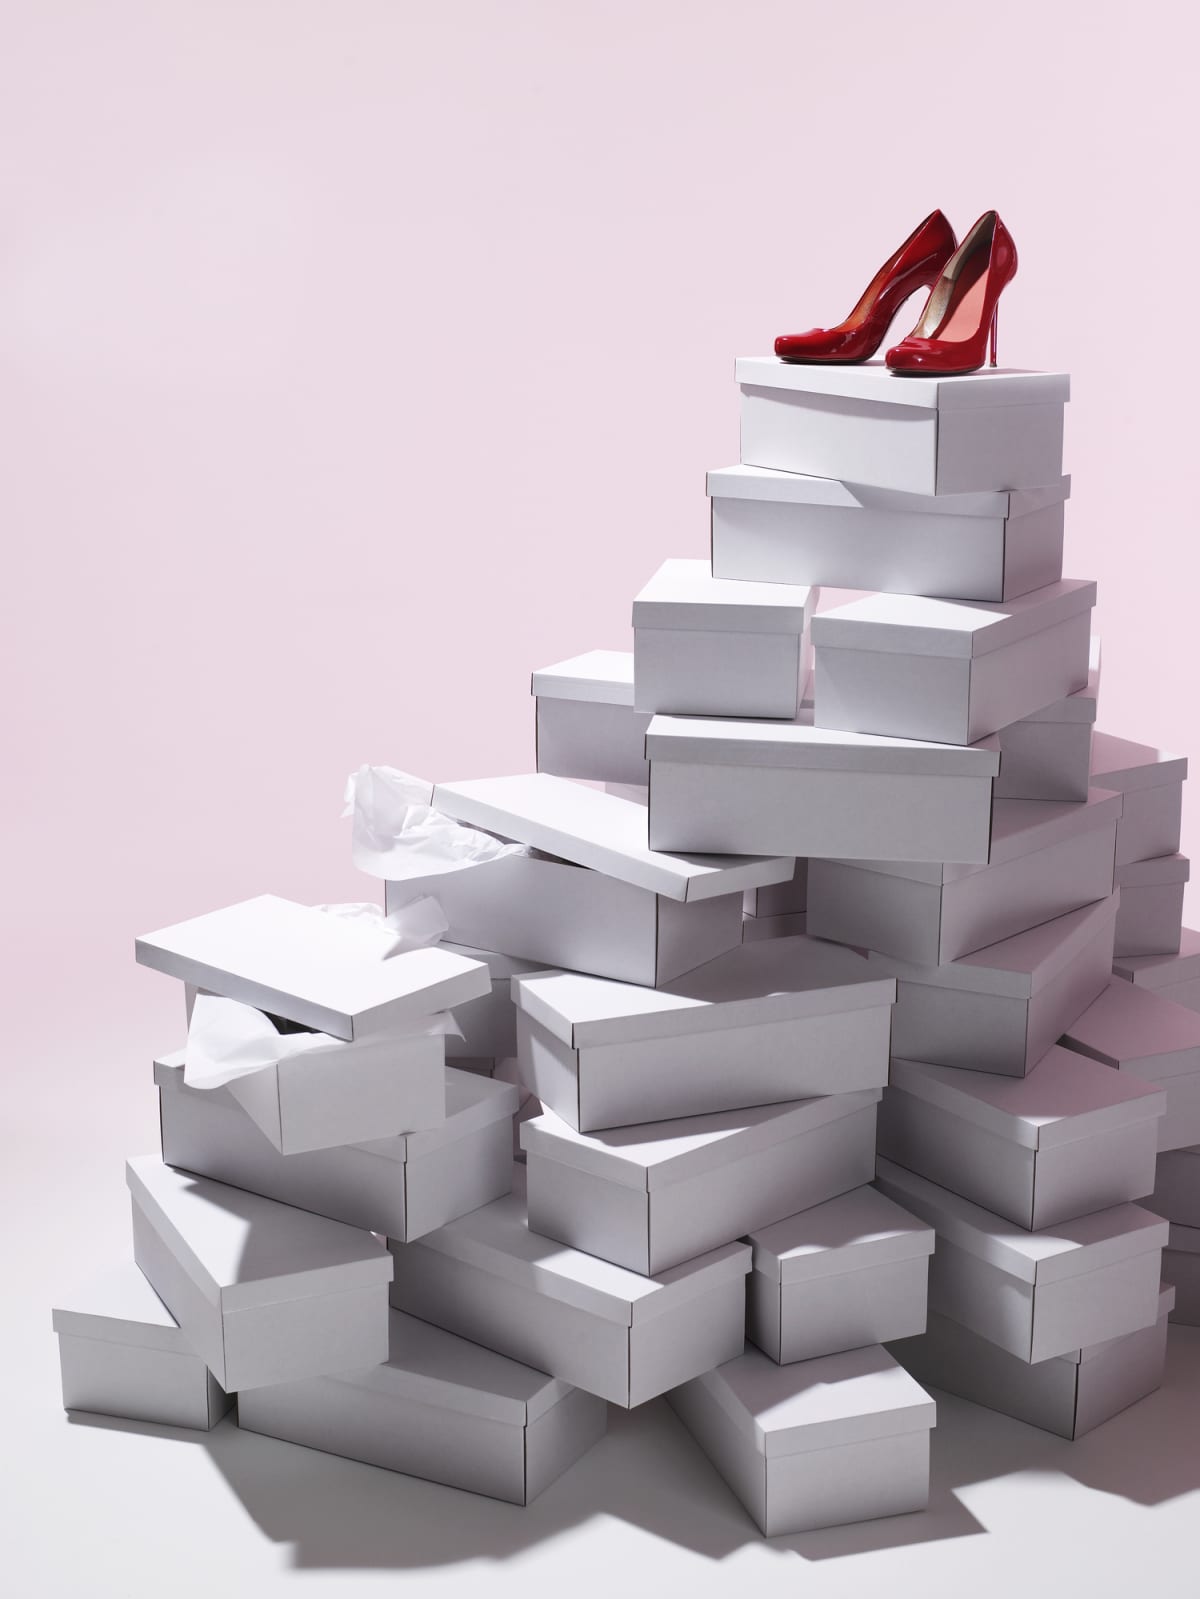 Red high heel shoes on top of a stack of shoe boxes